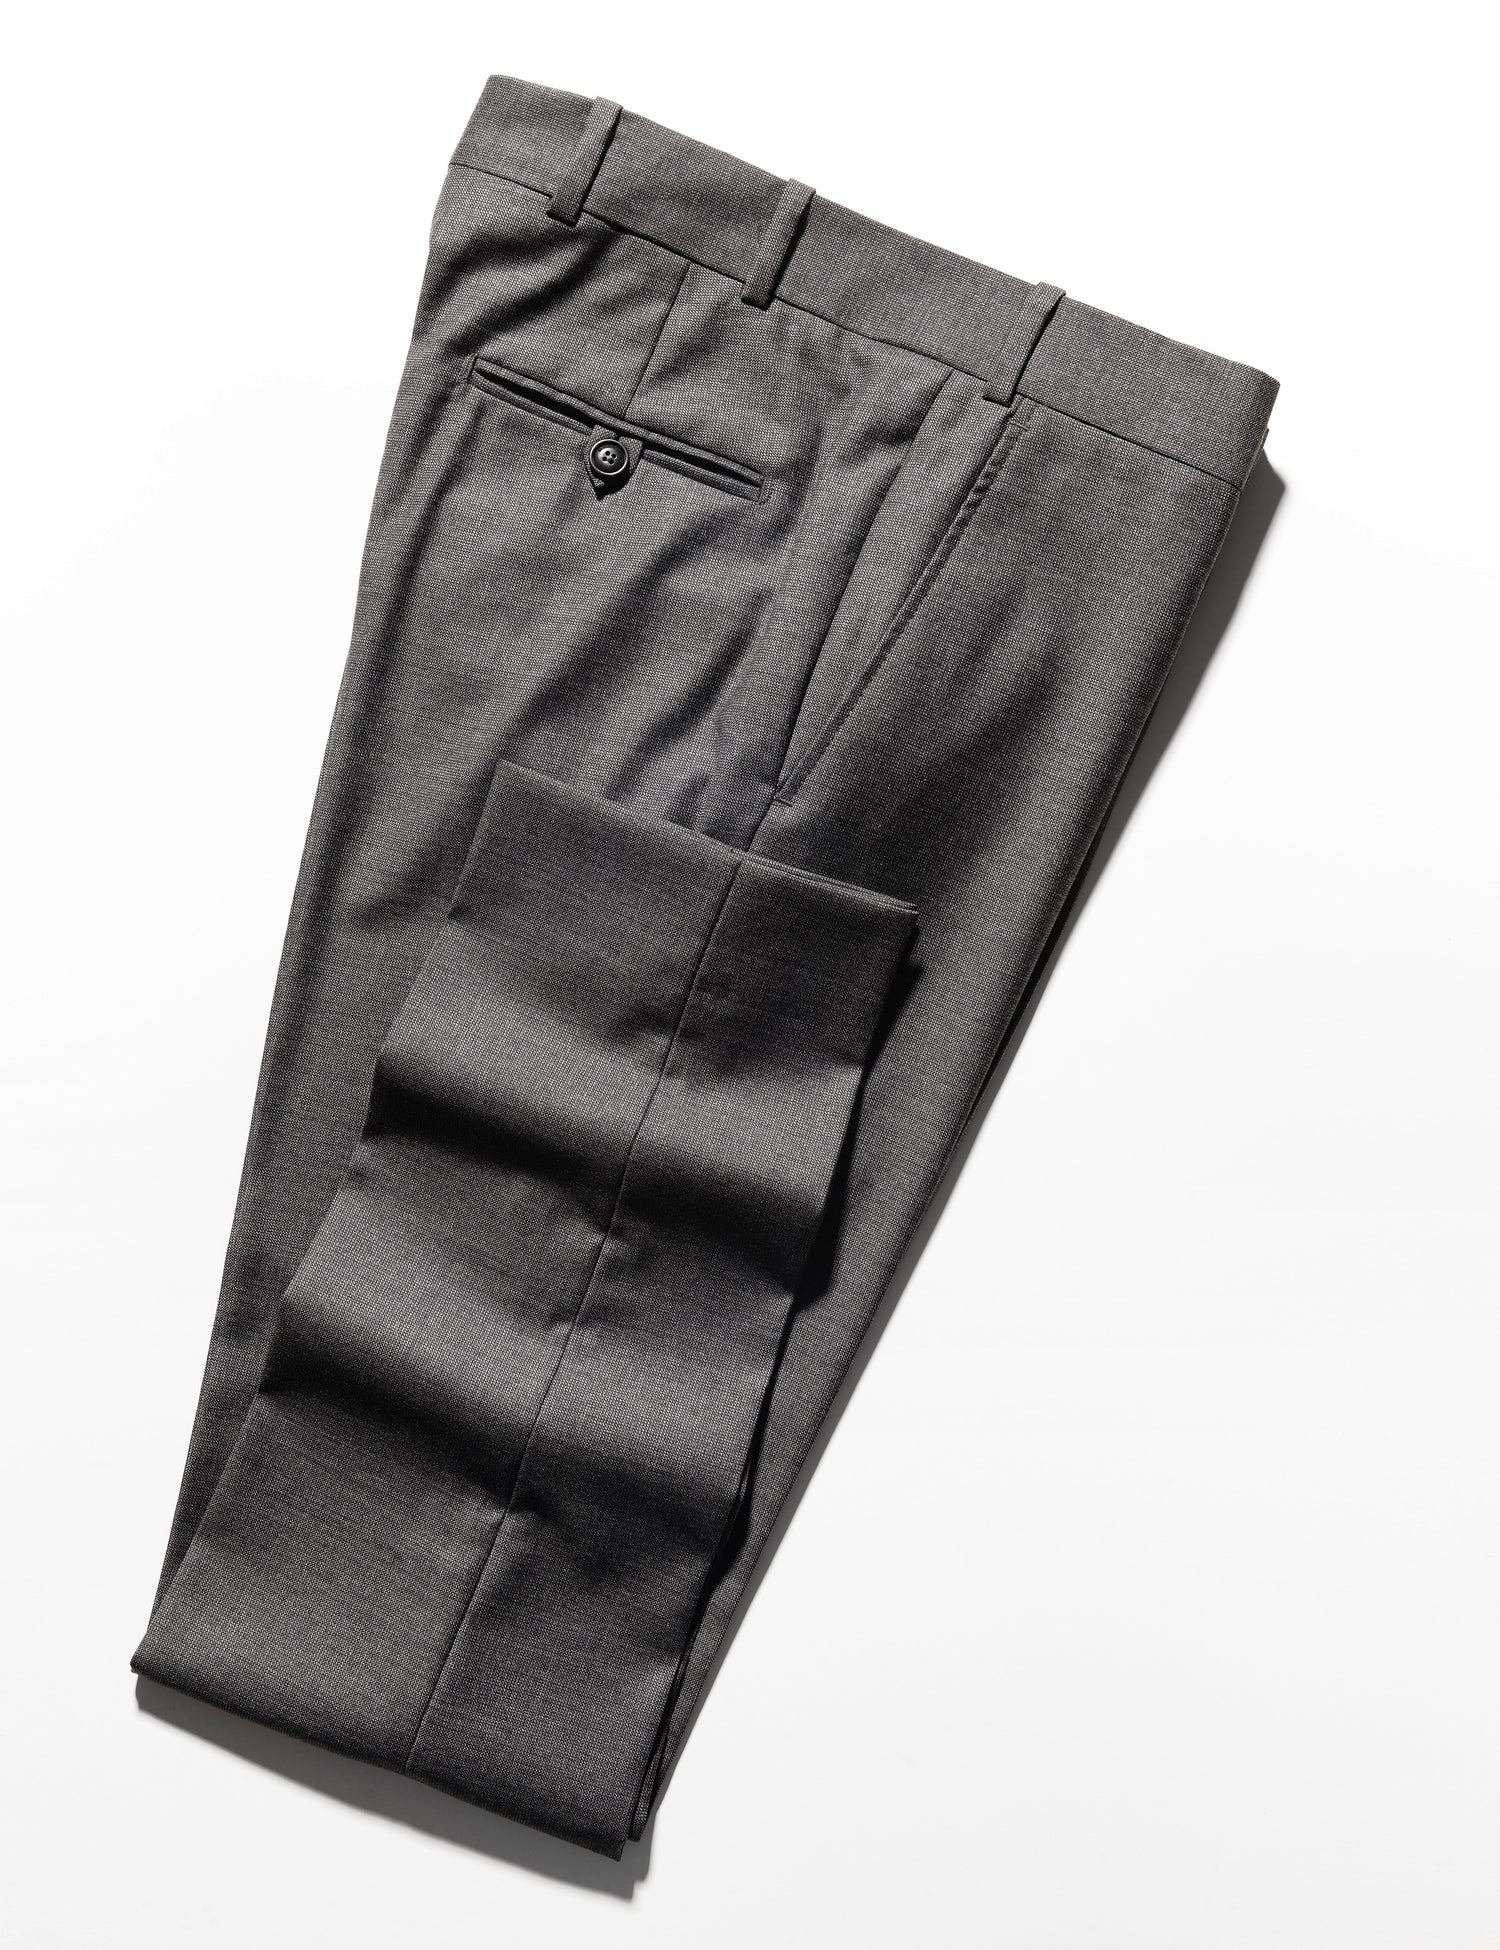 Folded shot of BKT50 Tailored Trousers in Wool Tickweave - Deep Gray showing hem, back pocket, and waistband